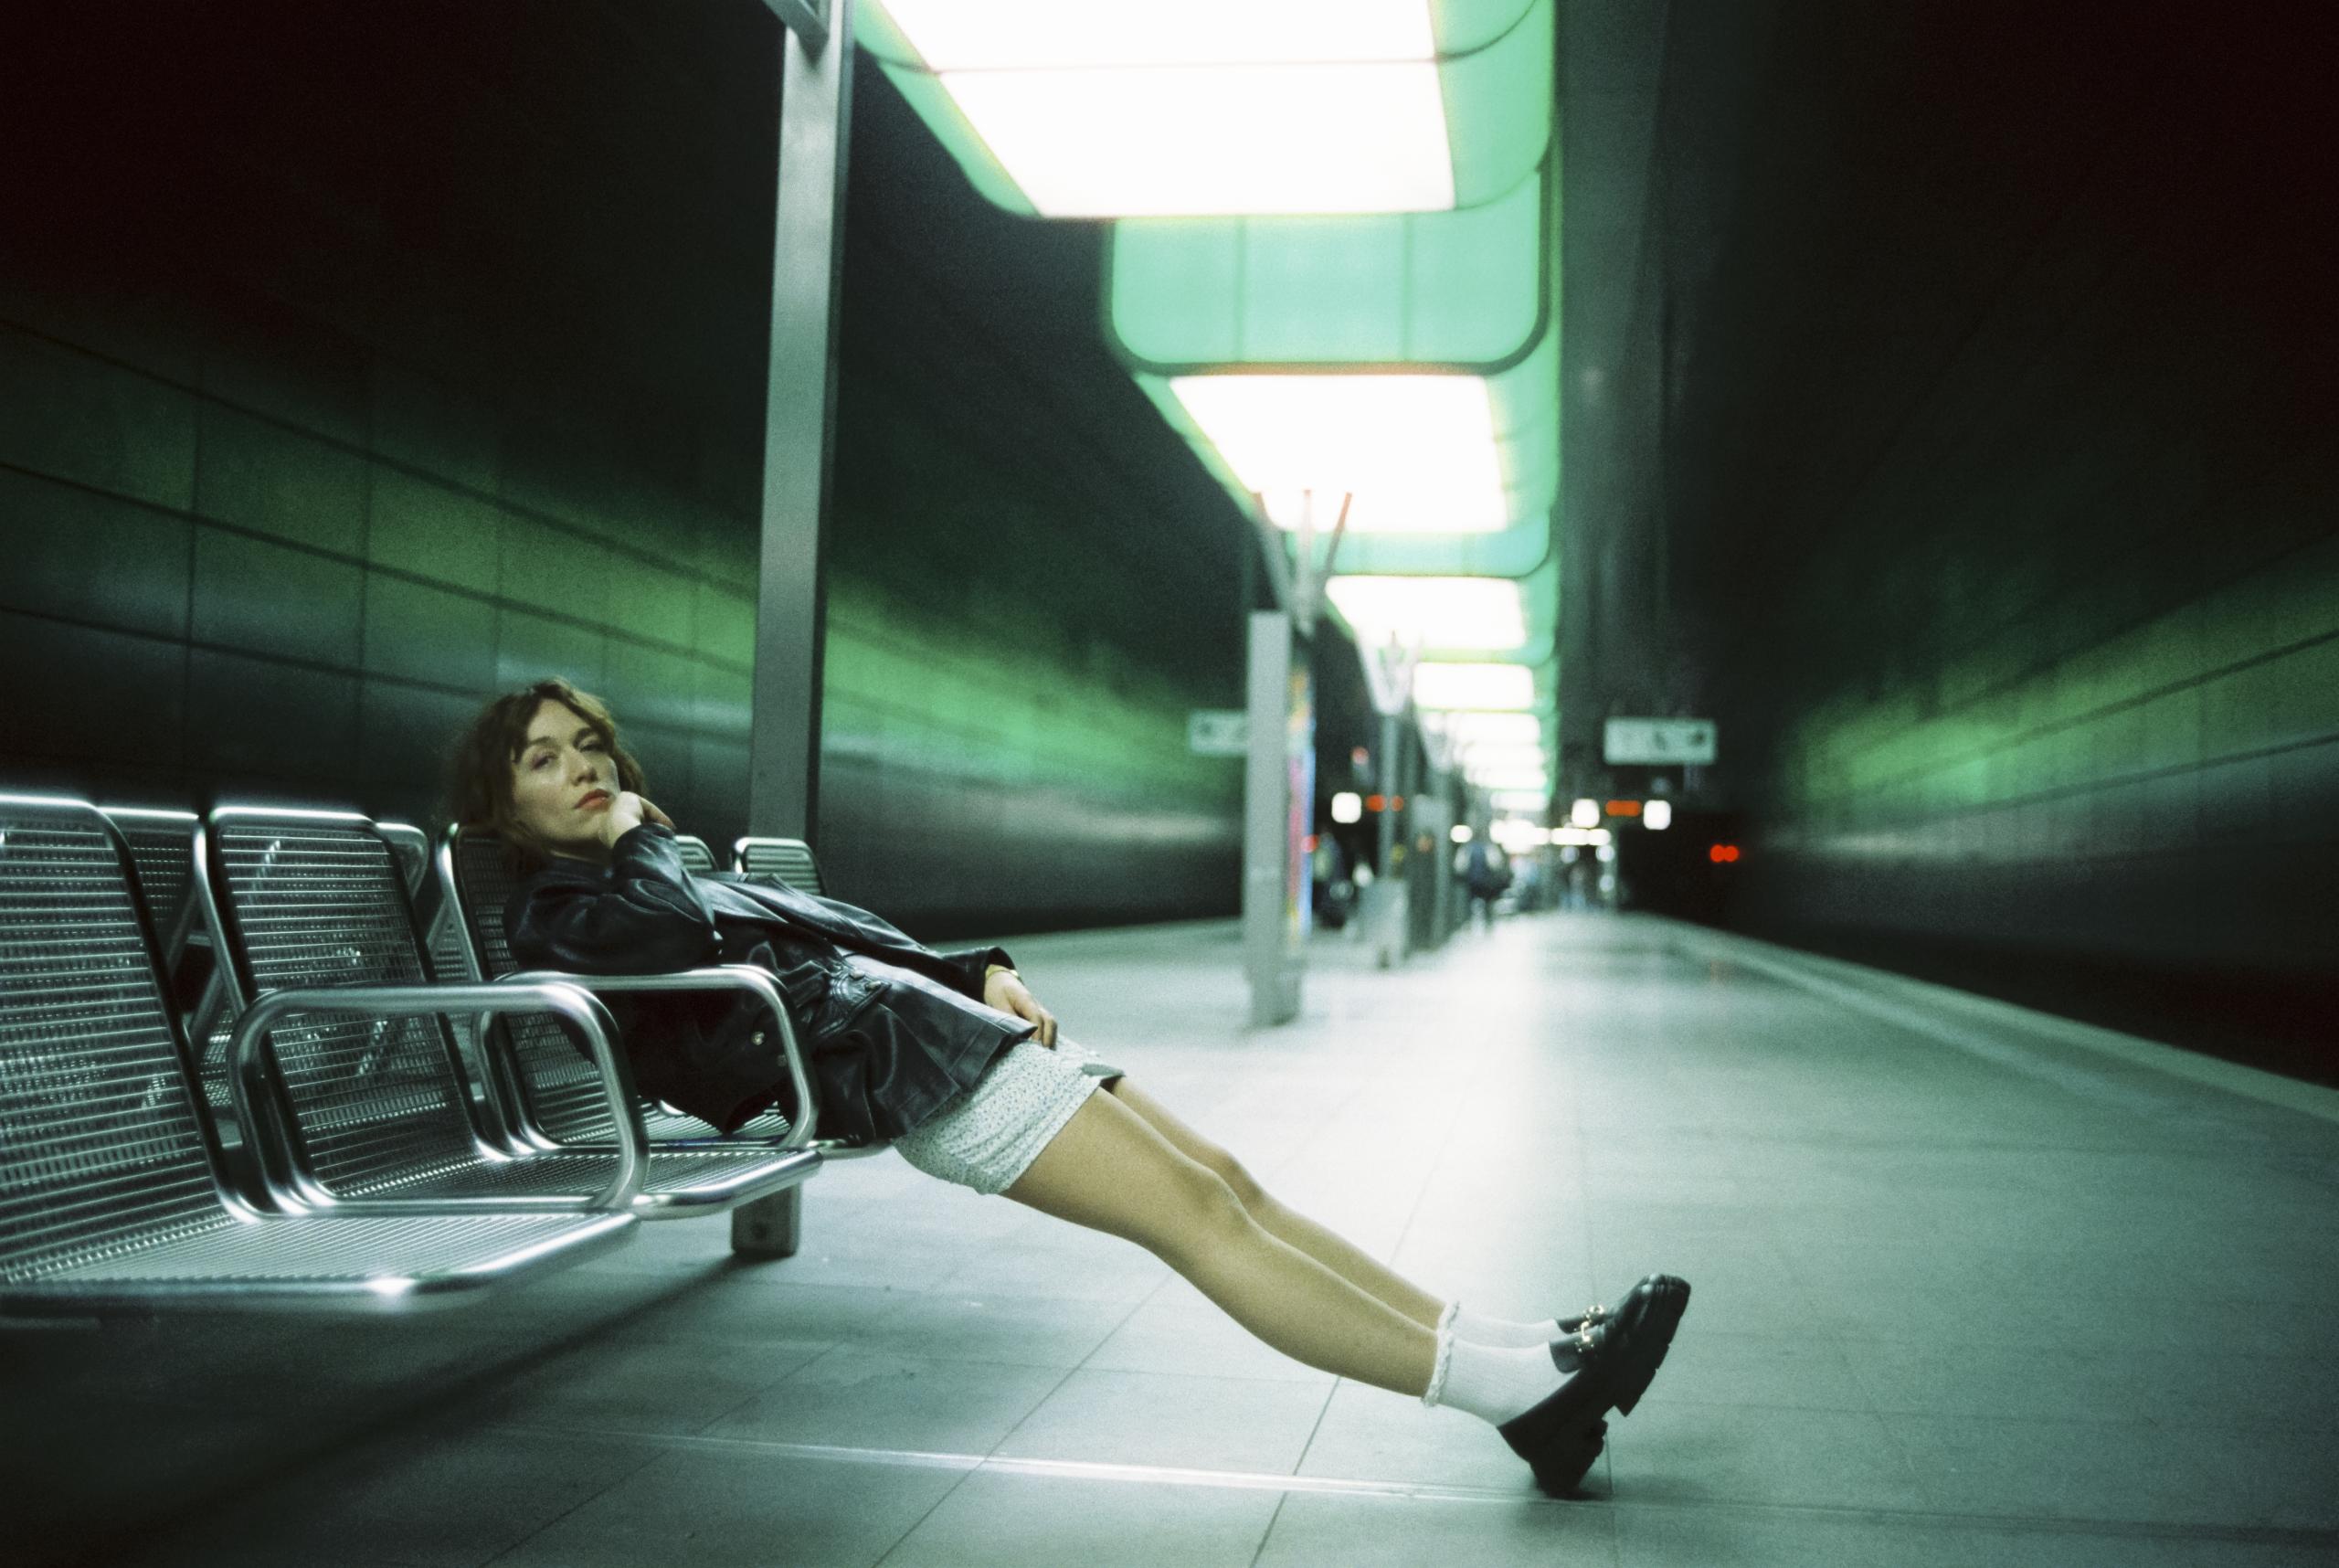 The platform of a subway station. A young woman in a leather jacket and shorts poses on the seats.